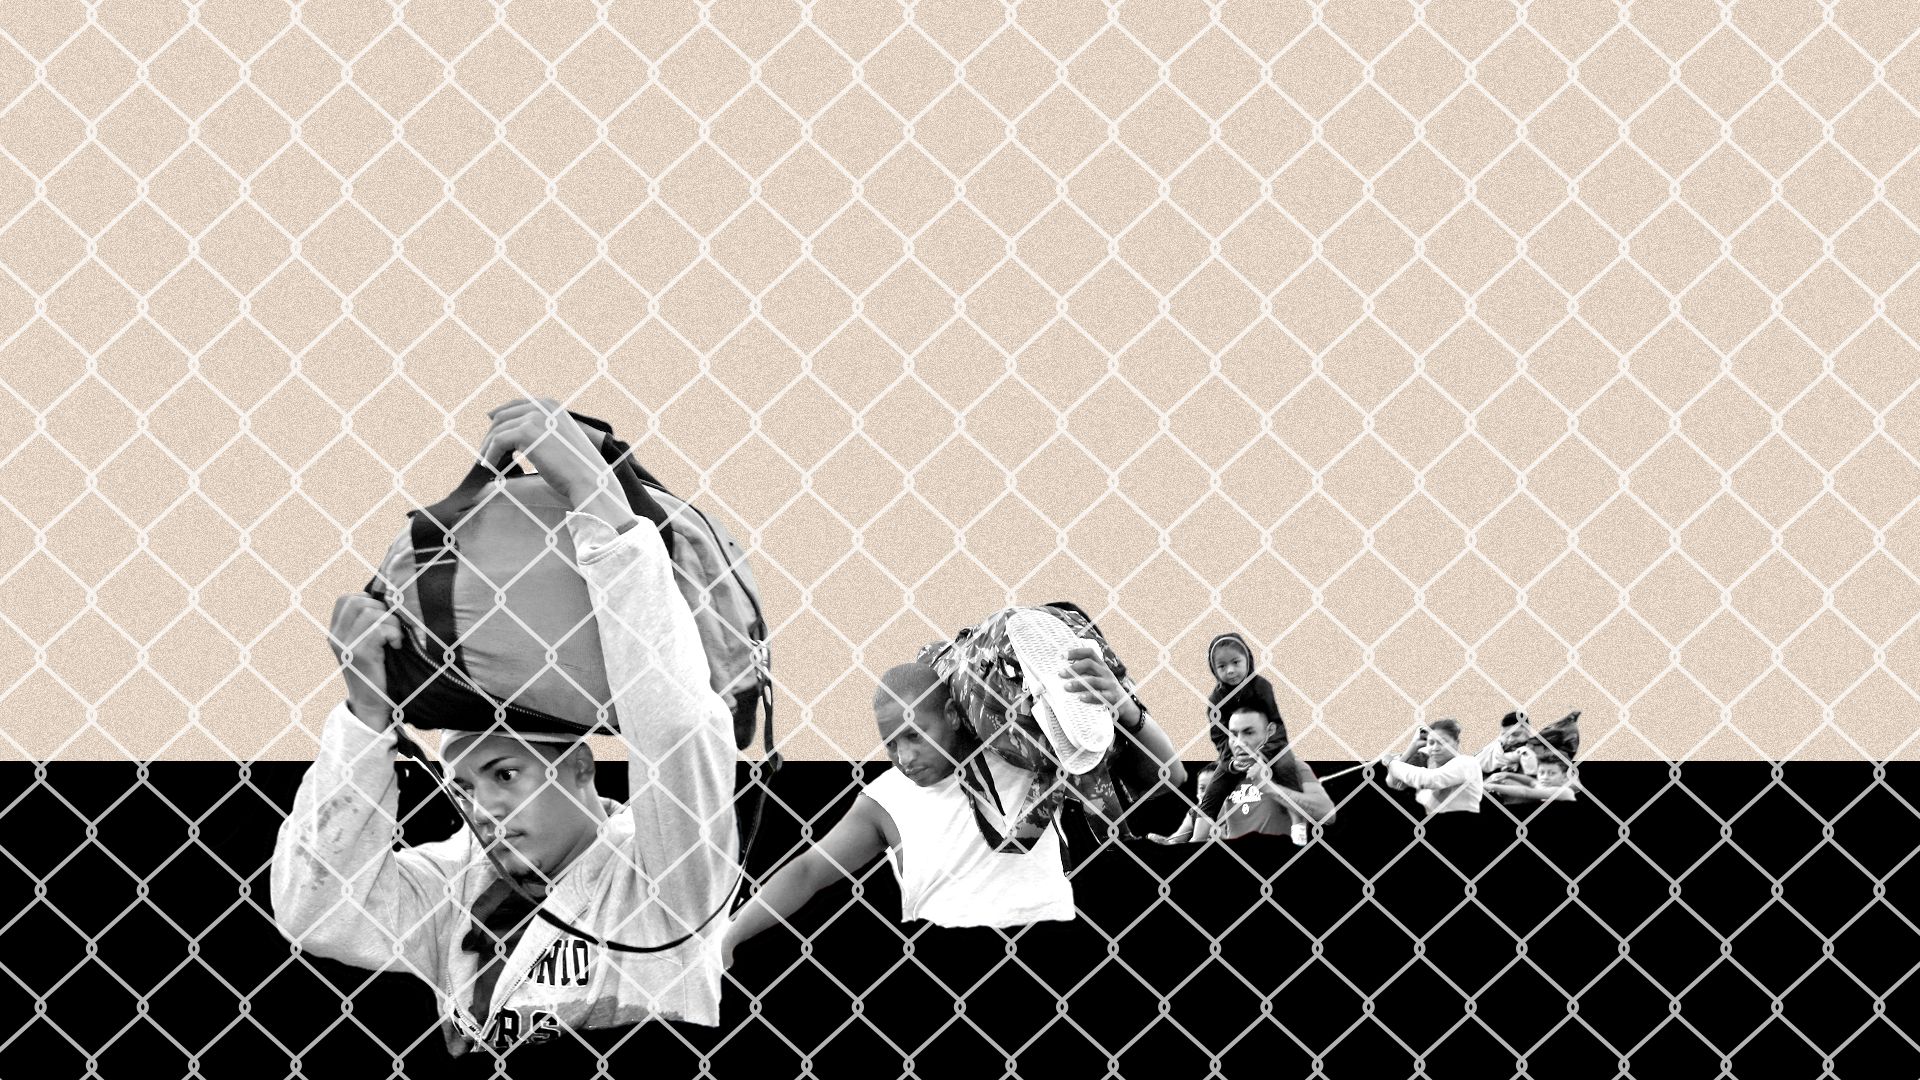 Illustrated collage of migrants wading through a dark background with a chain link fence texture on top.